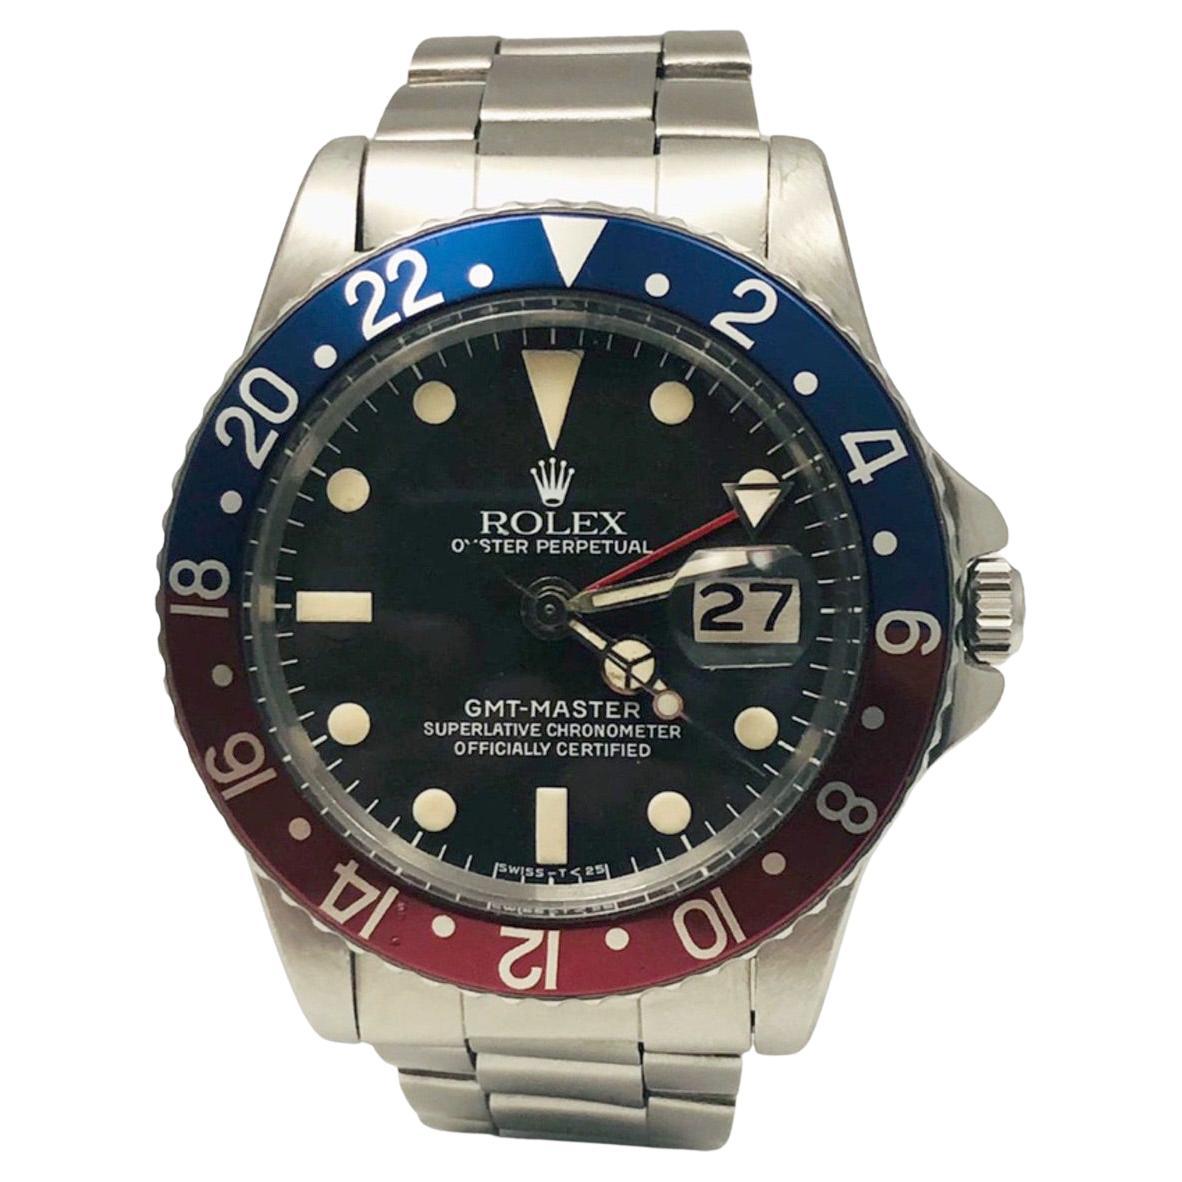 Rolex GMT-Master Ref. 1675 'Pepsi' Stainless Steel Red & Blue Bezel Watch For Sale